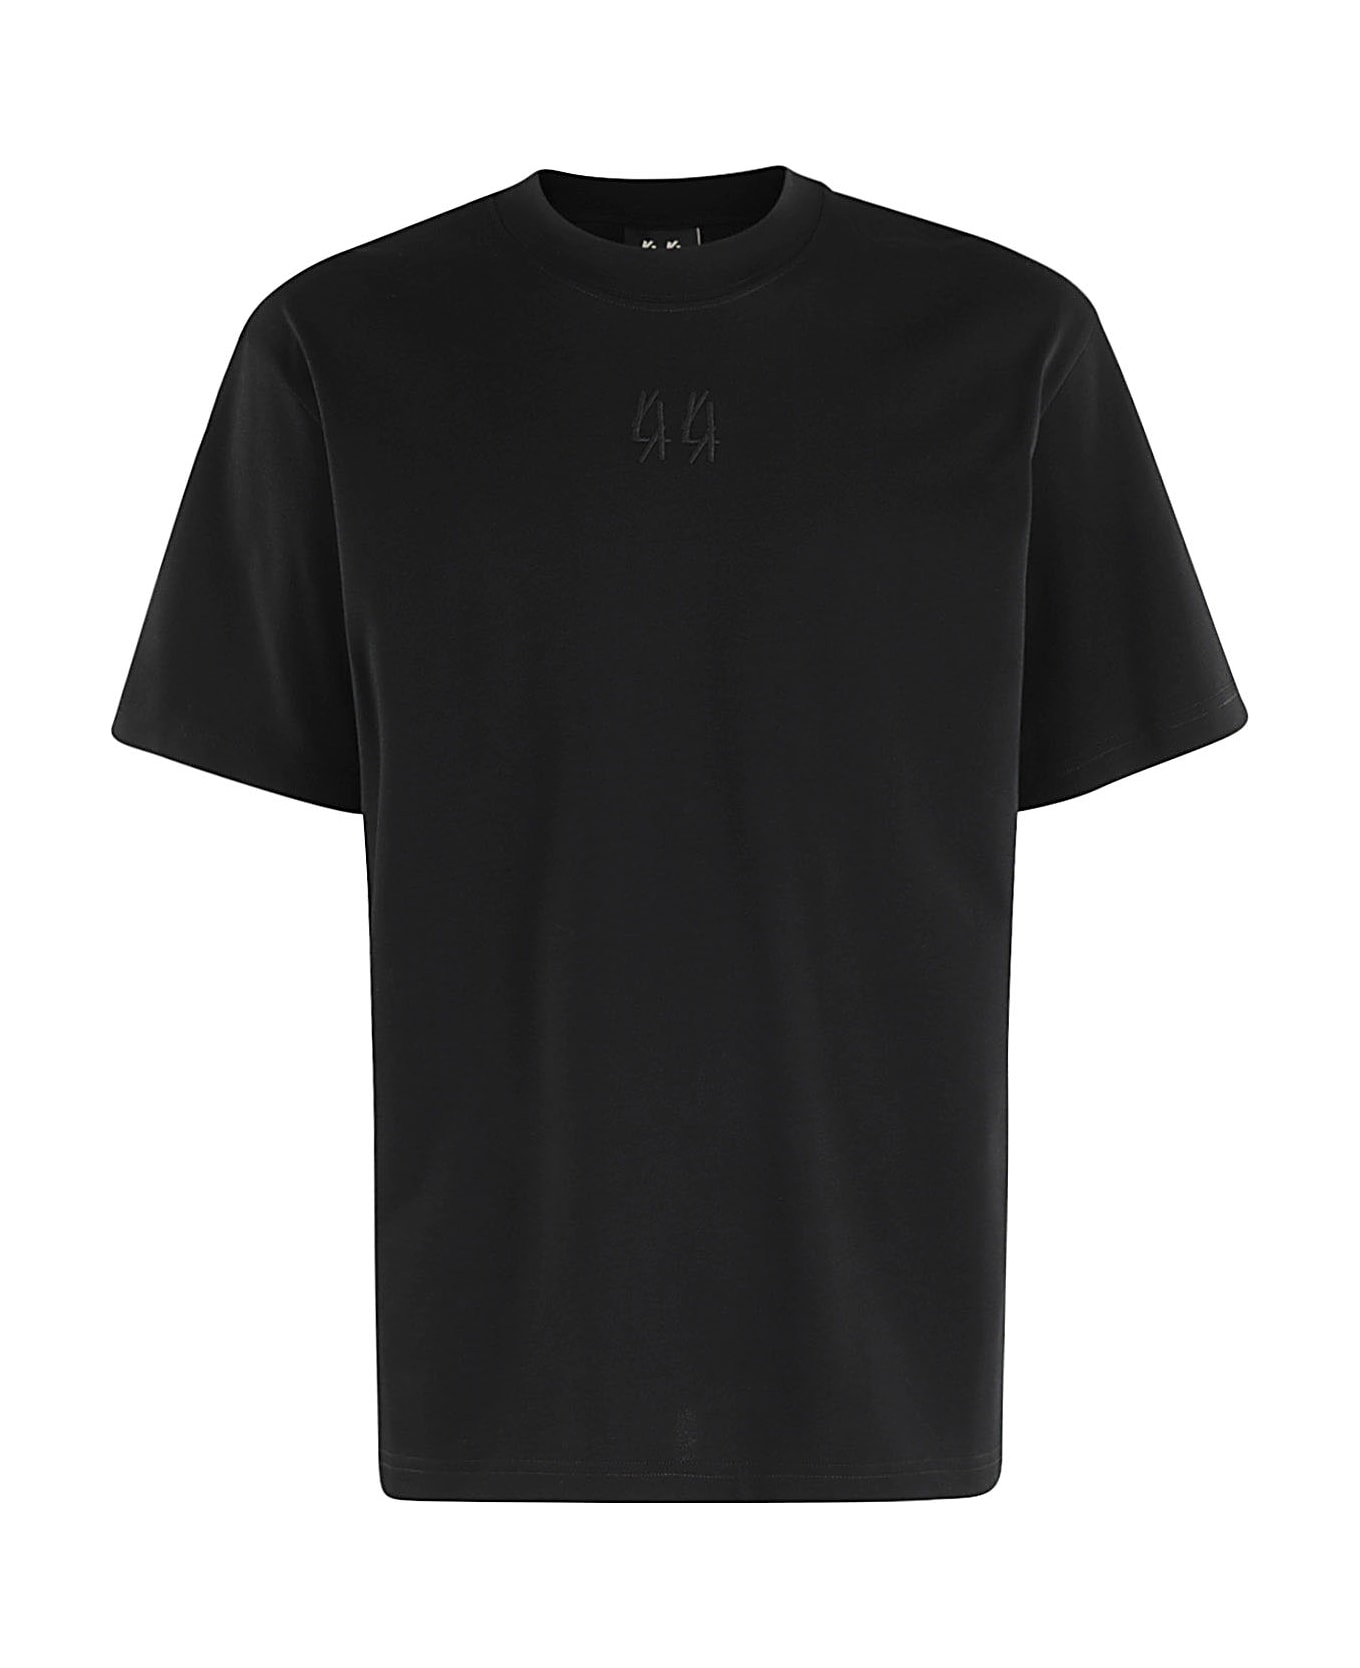 44 Label Group Classic Tee シャツ